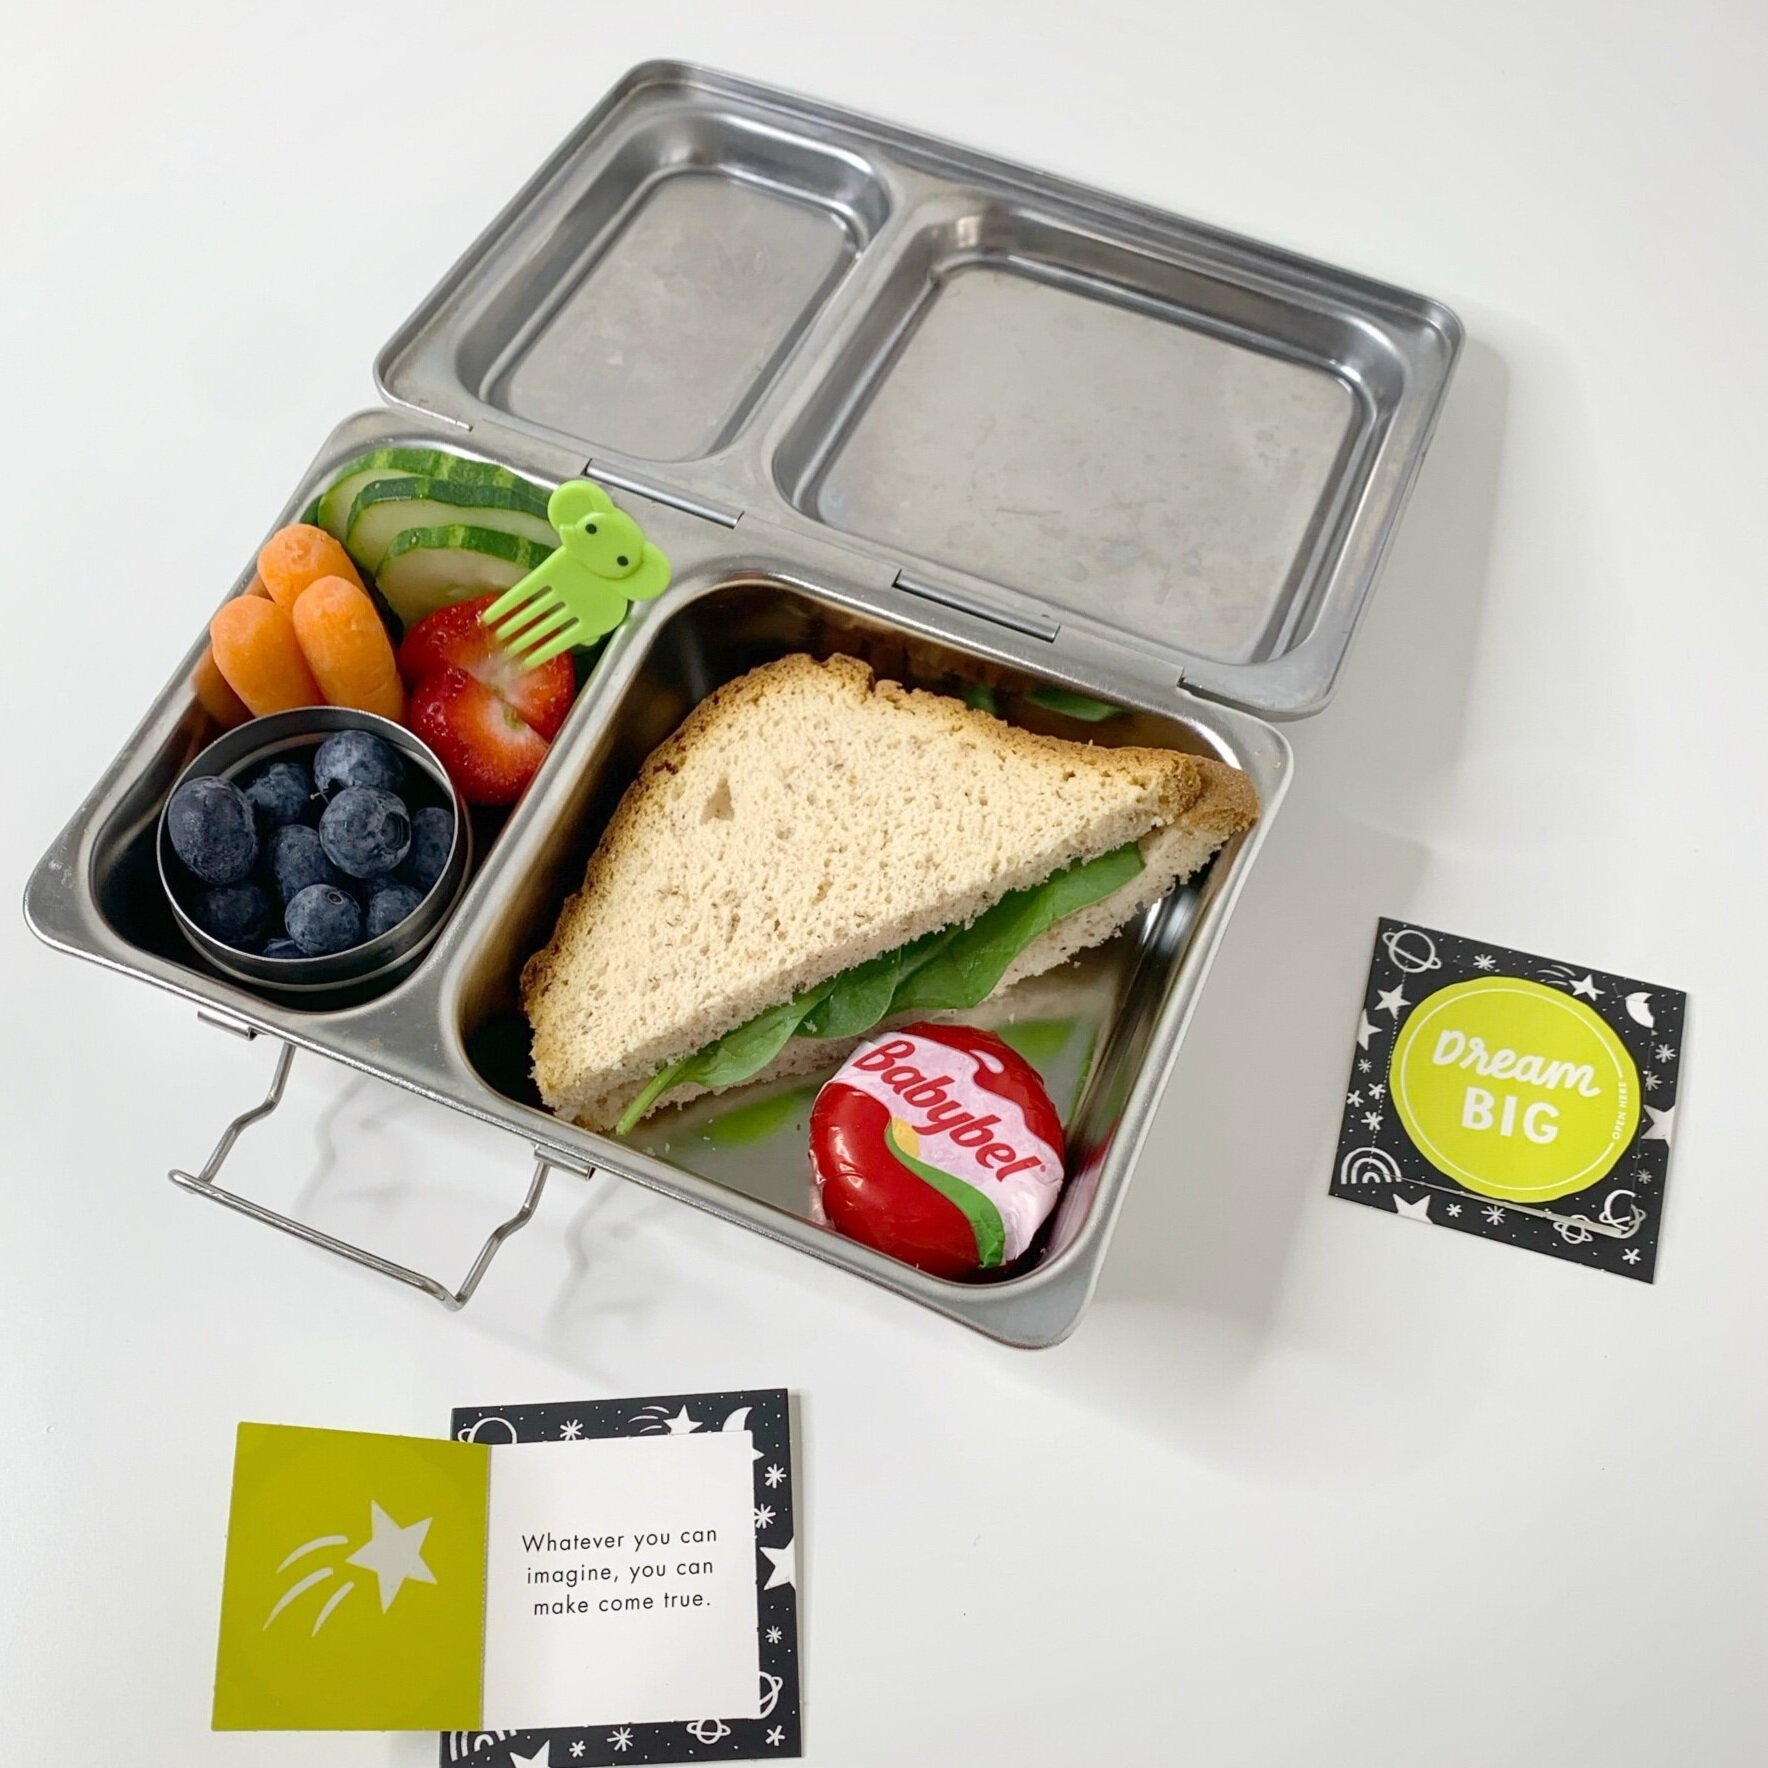 PlanetBox ROVER Eco-Friendly Stainless Steel Bento Lunch Box with